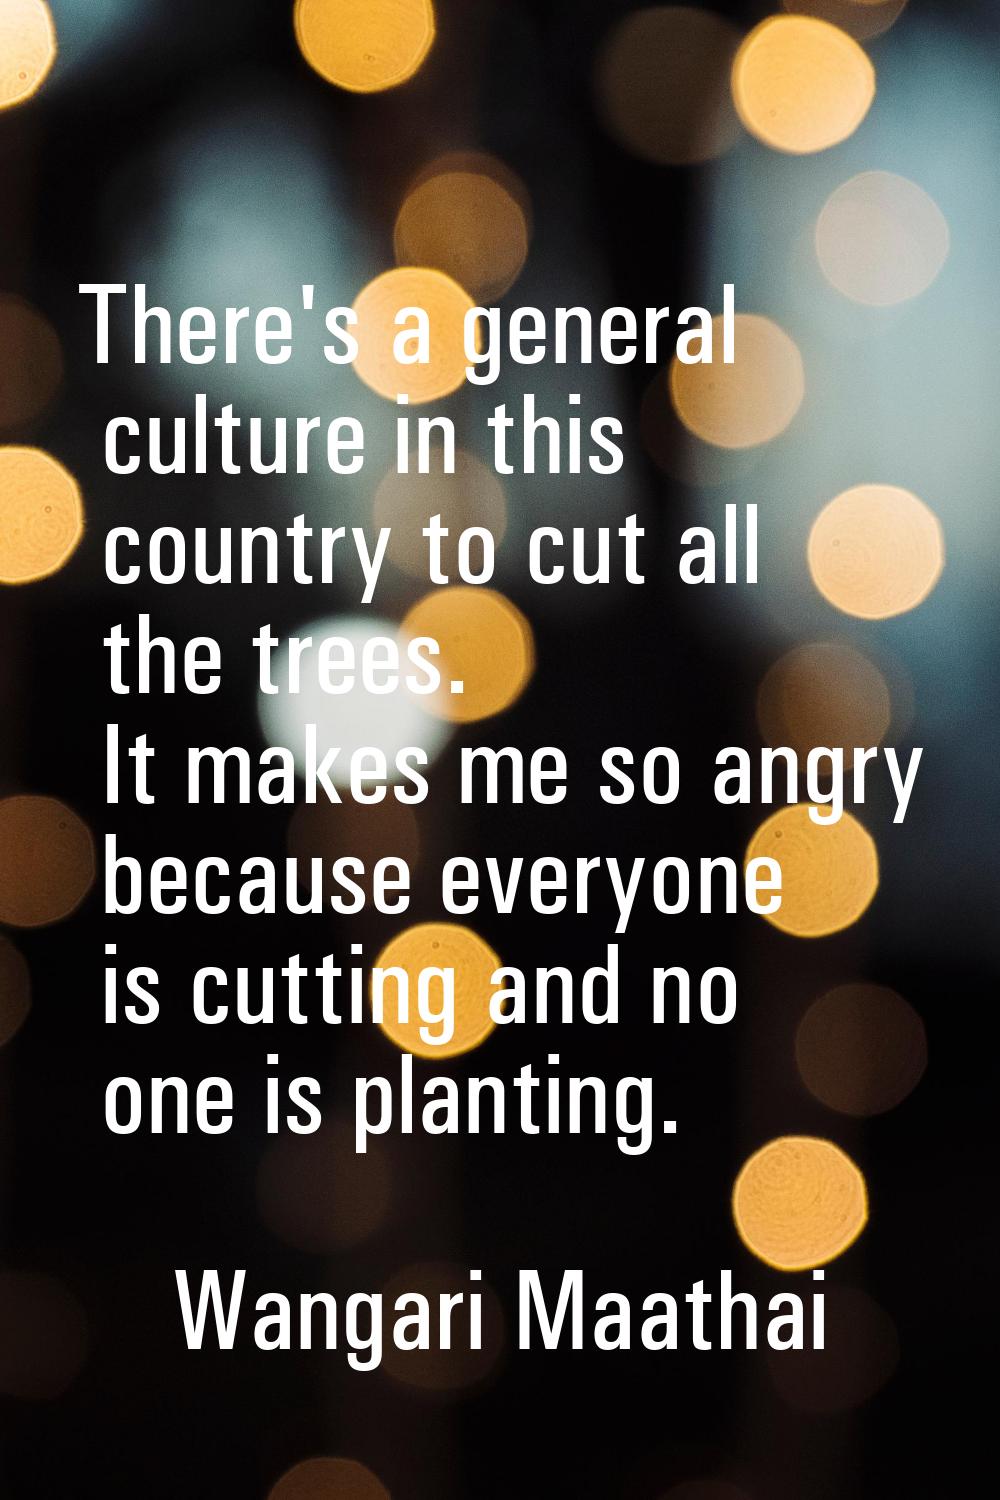 There's a general culture in this country to cut all the trees. It makes me so angry because everyo